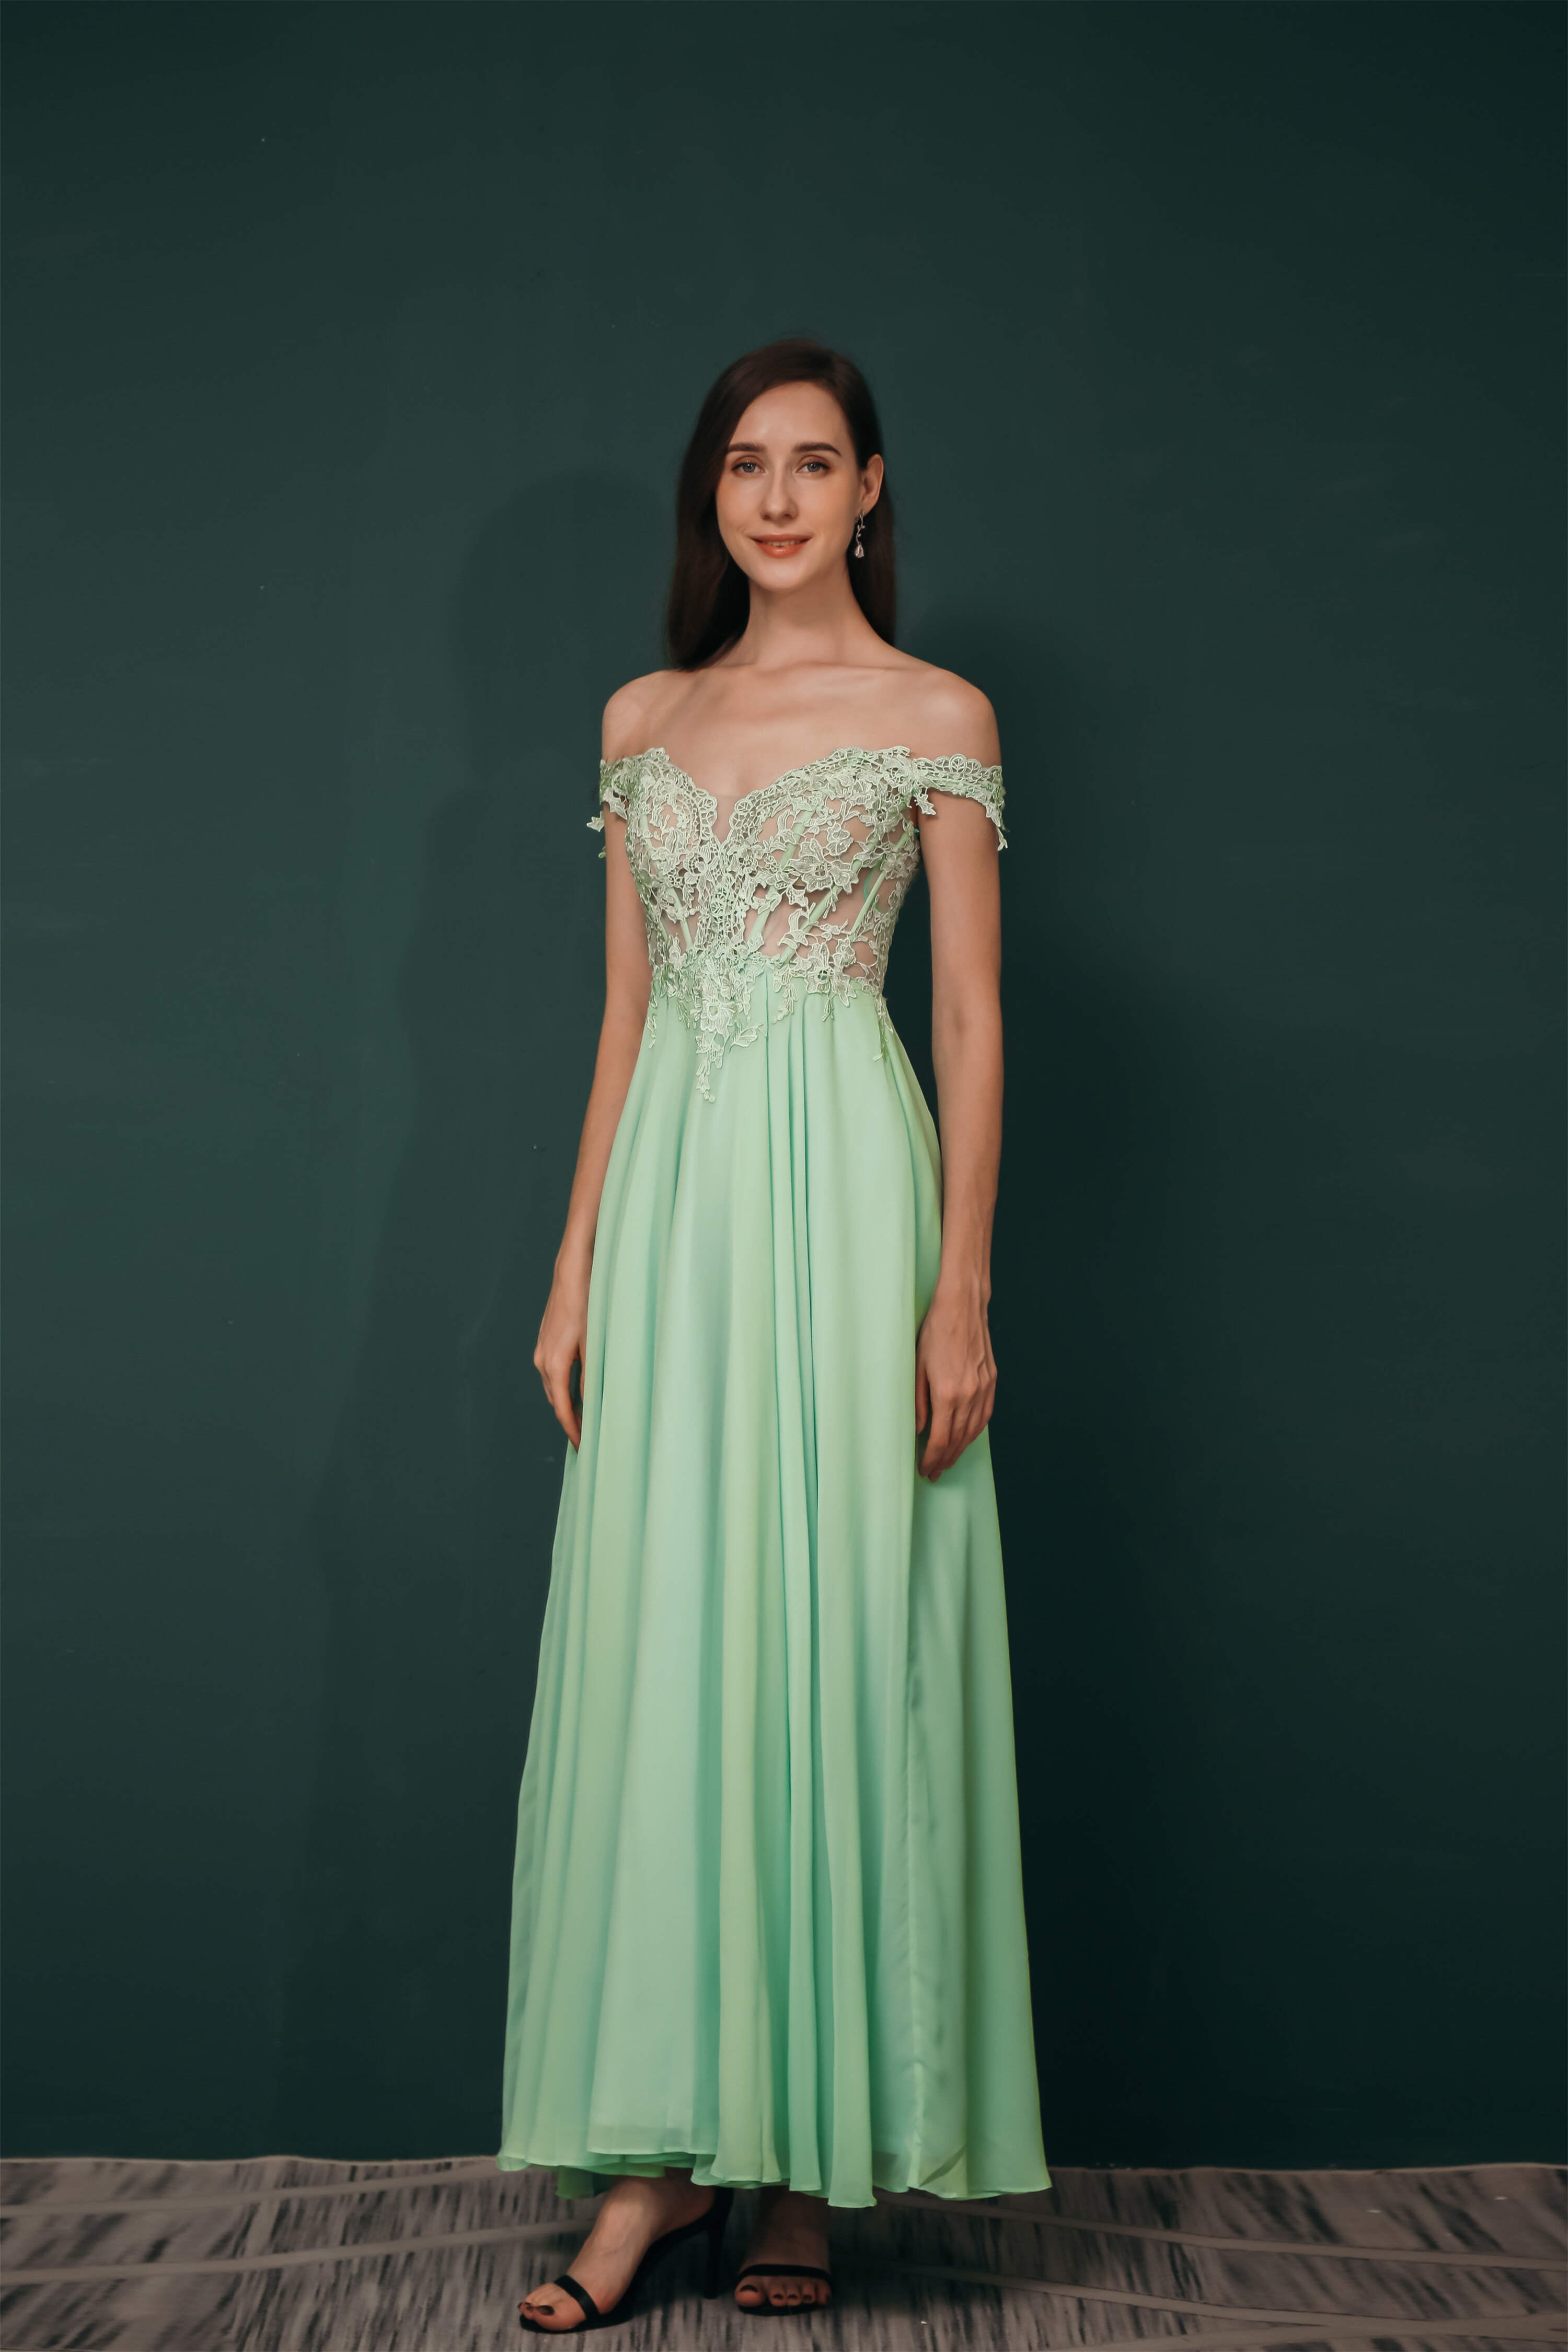 Party Dress Prom, Off The Shoulder Charming Long Chiffon Prom Dresses With Appliques